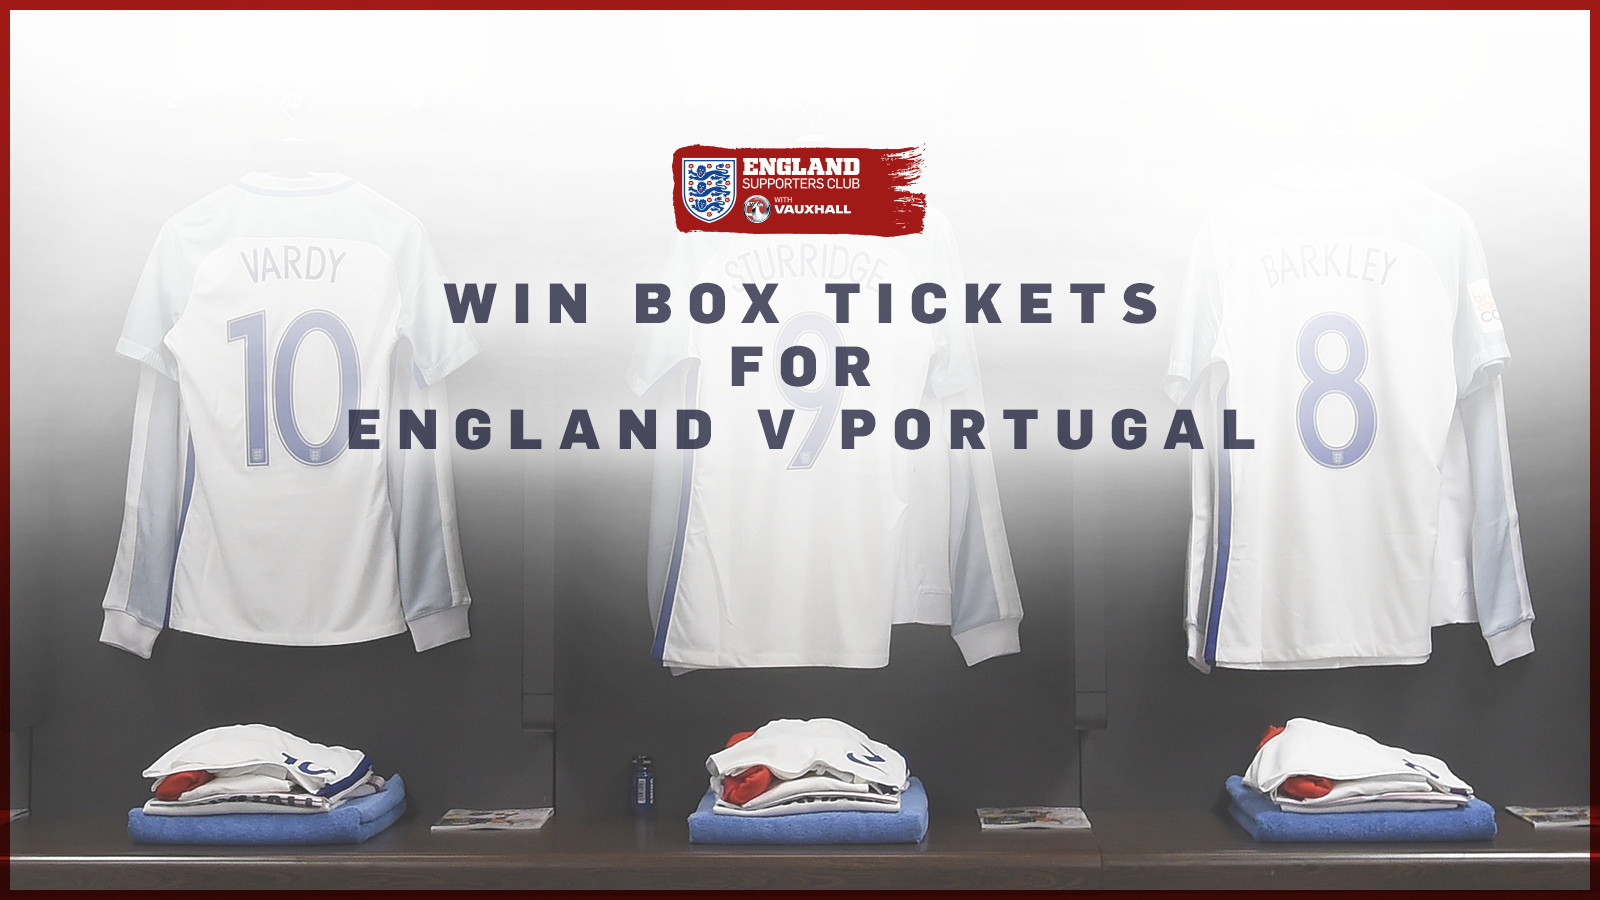 Win box tickets to England v Portugal